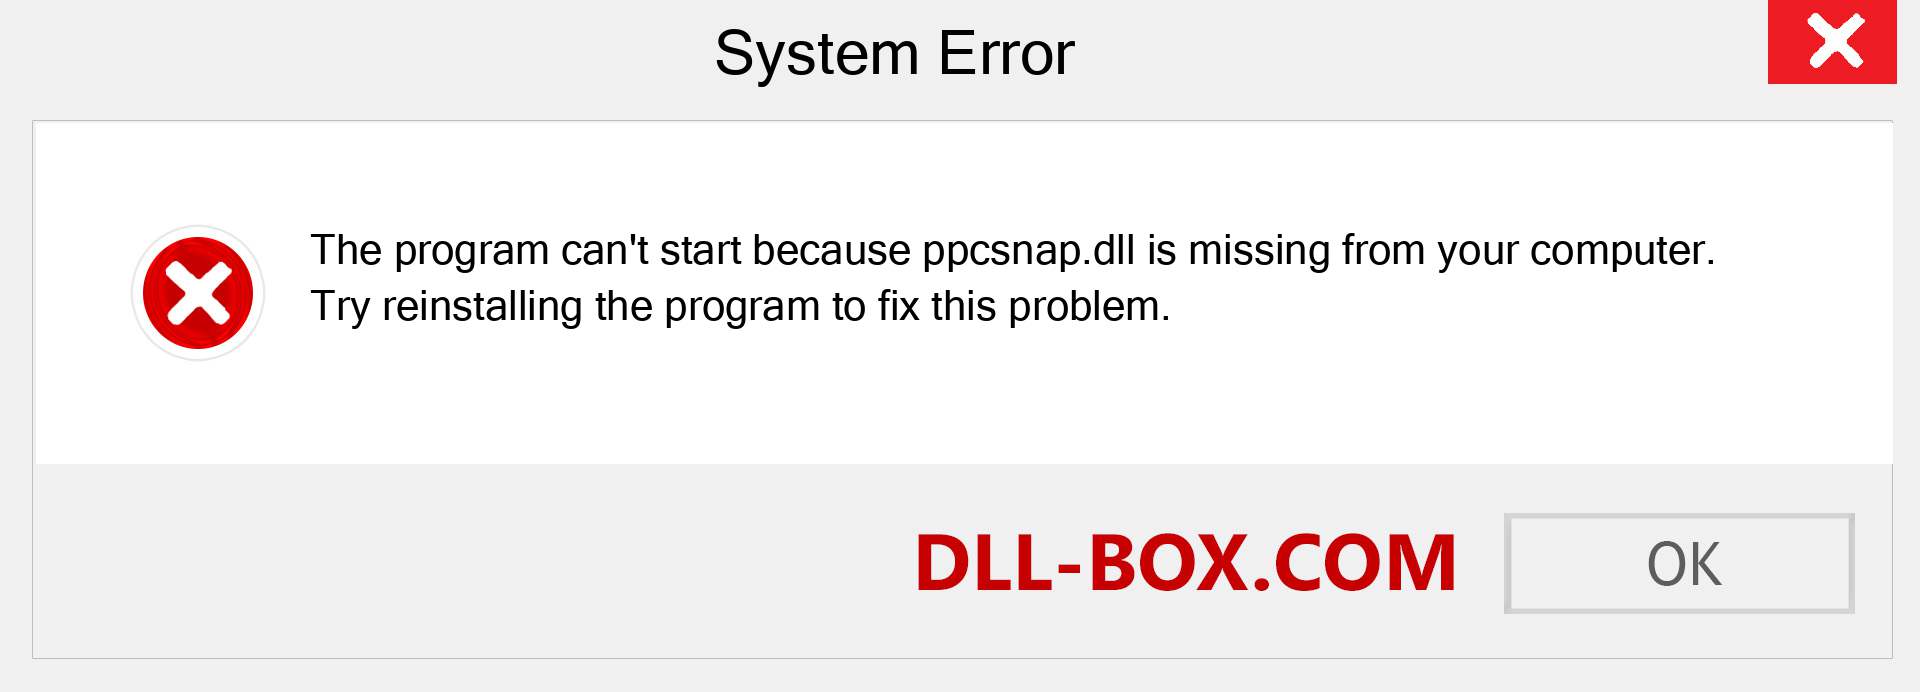  ppcsnap.dll file is missing?. Download for Windows 7, 8, 10 - Fix  ppcsnap dll Missing Error on Windows, photos, images